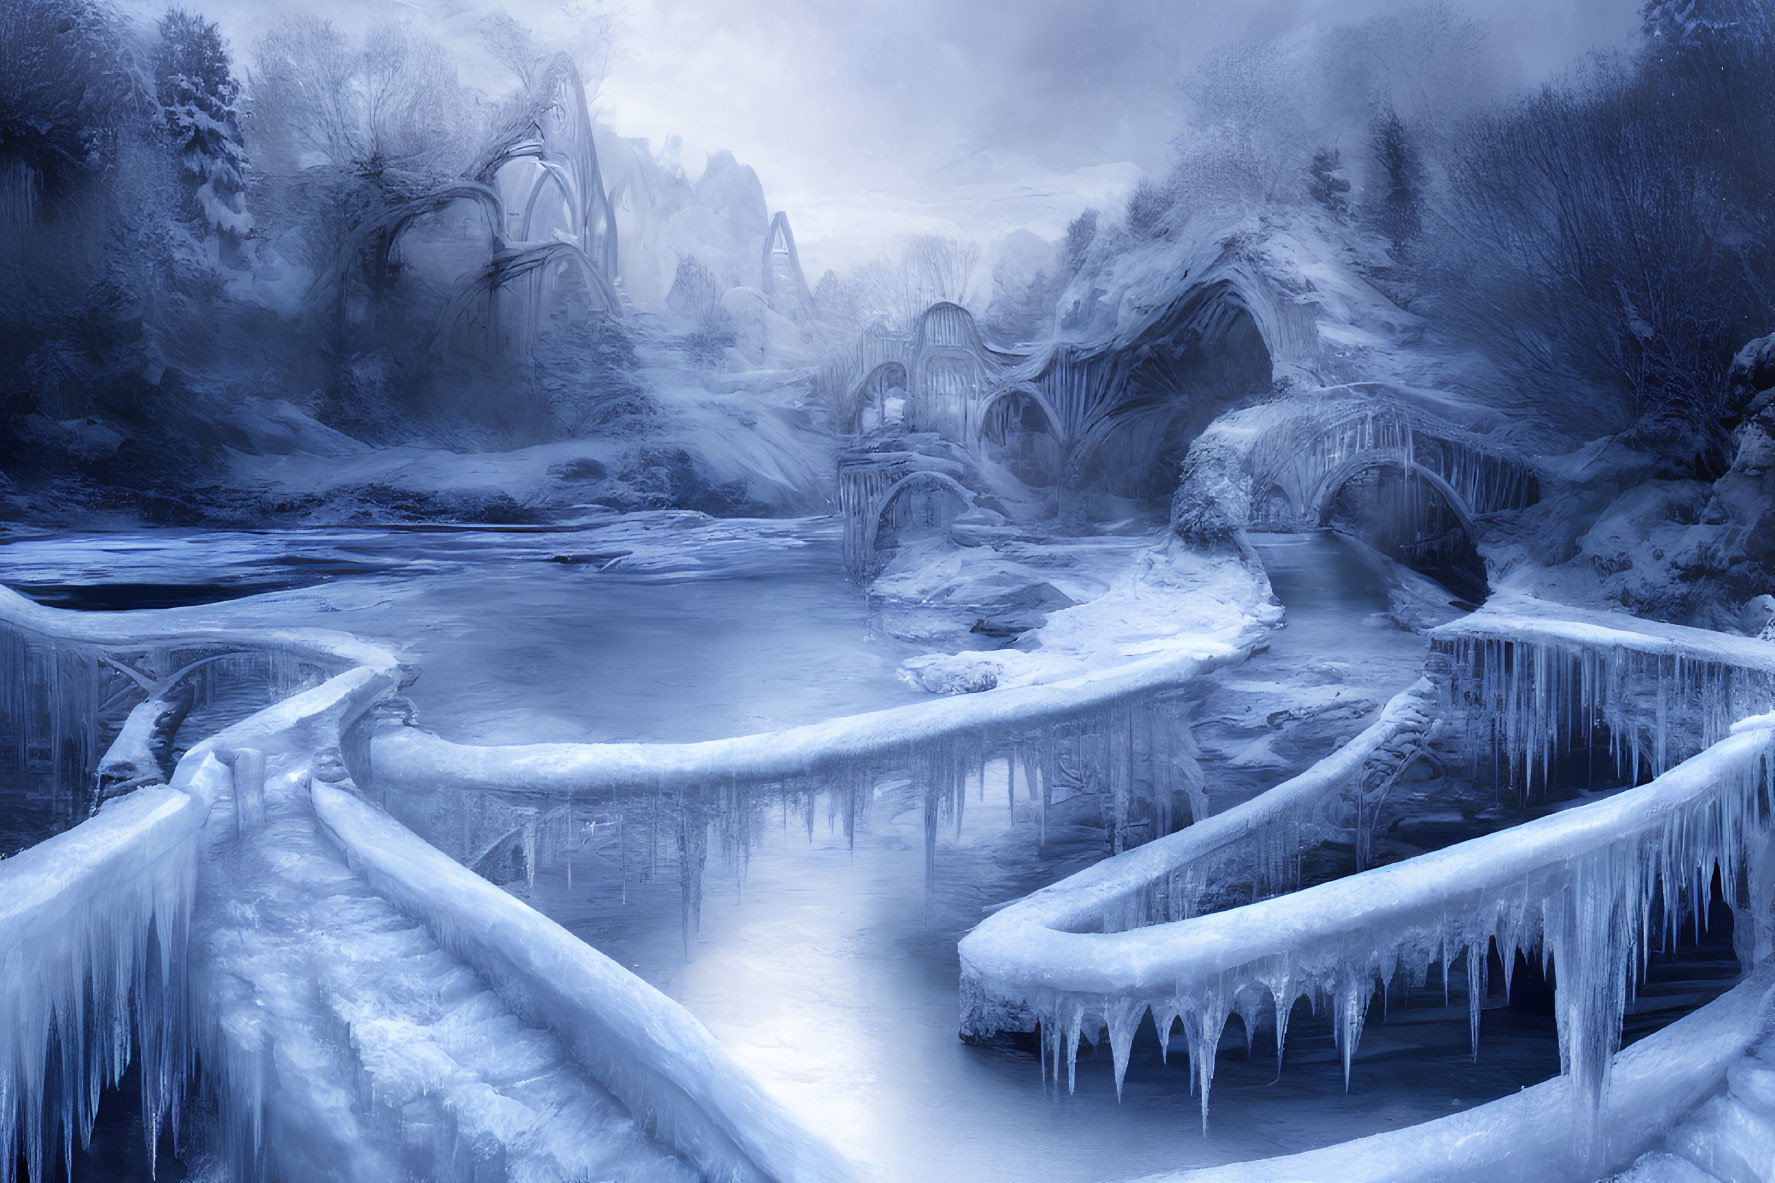 Surreal wintry landscape with icy rivers, frost-covered trees, stone bridges, snowy cliffs